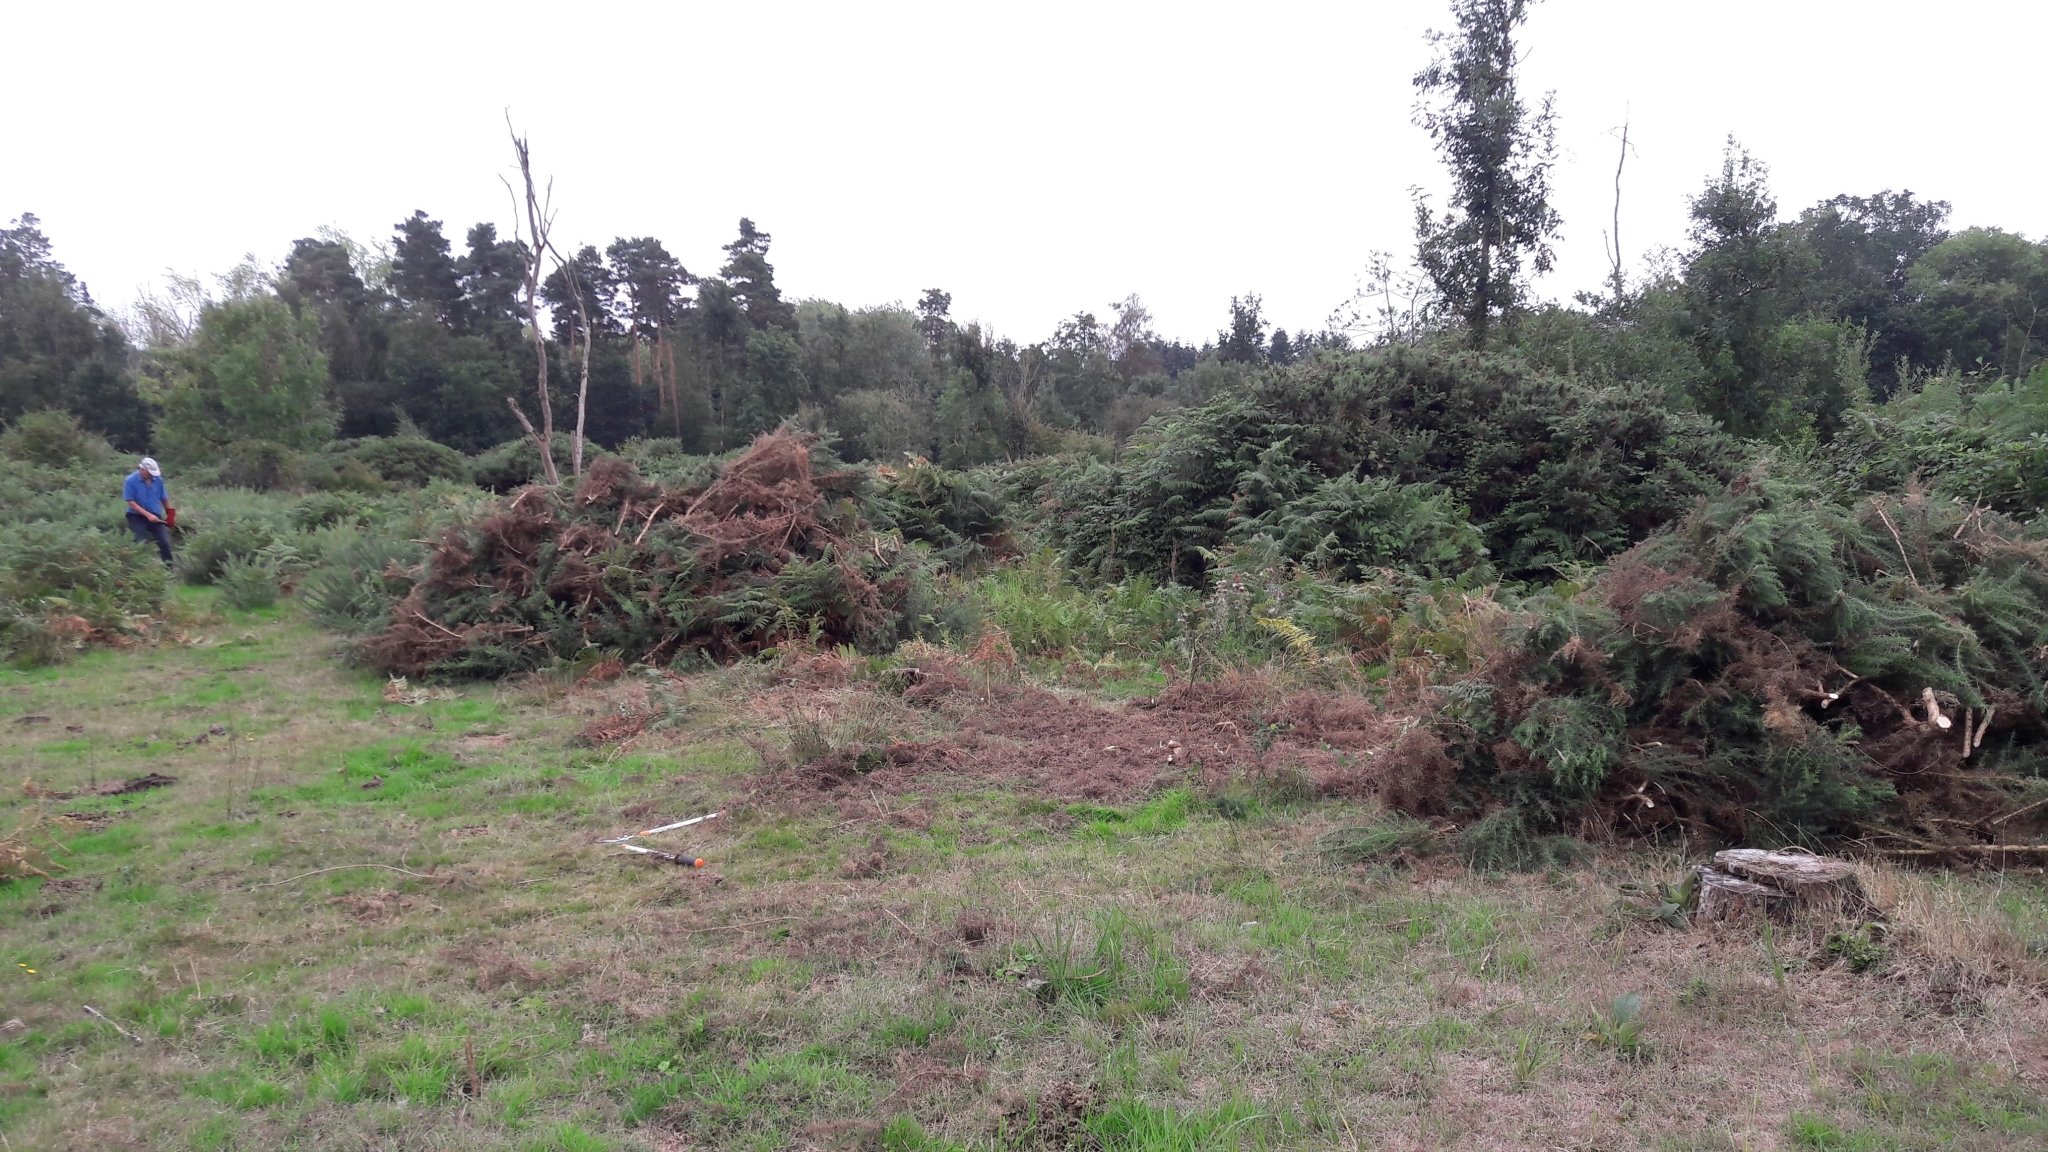 A photo from the FoTF Conservation Event - August 2018 - Gorse Removal at Hockham Hills & Holes : Piles of Gorse where the team have removed a Gorse bush